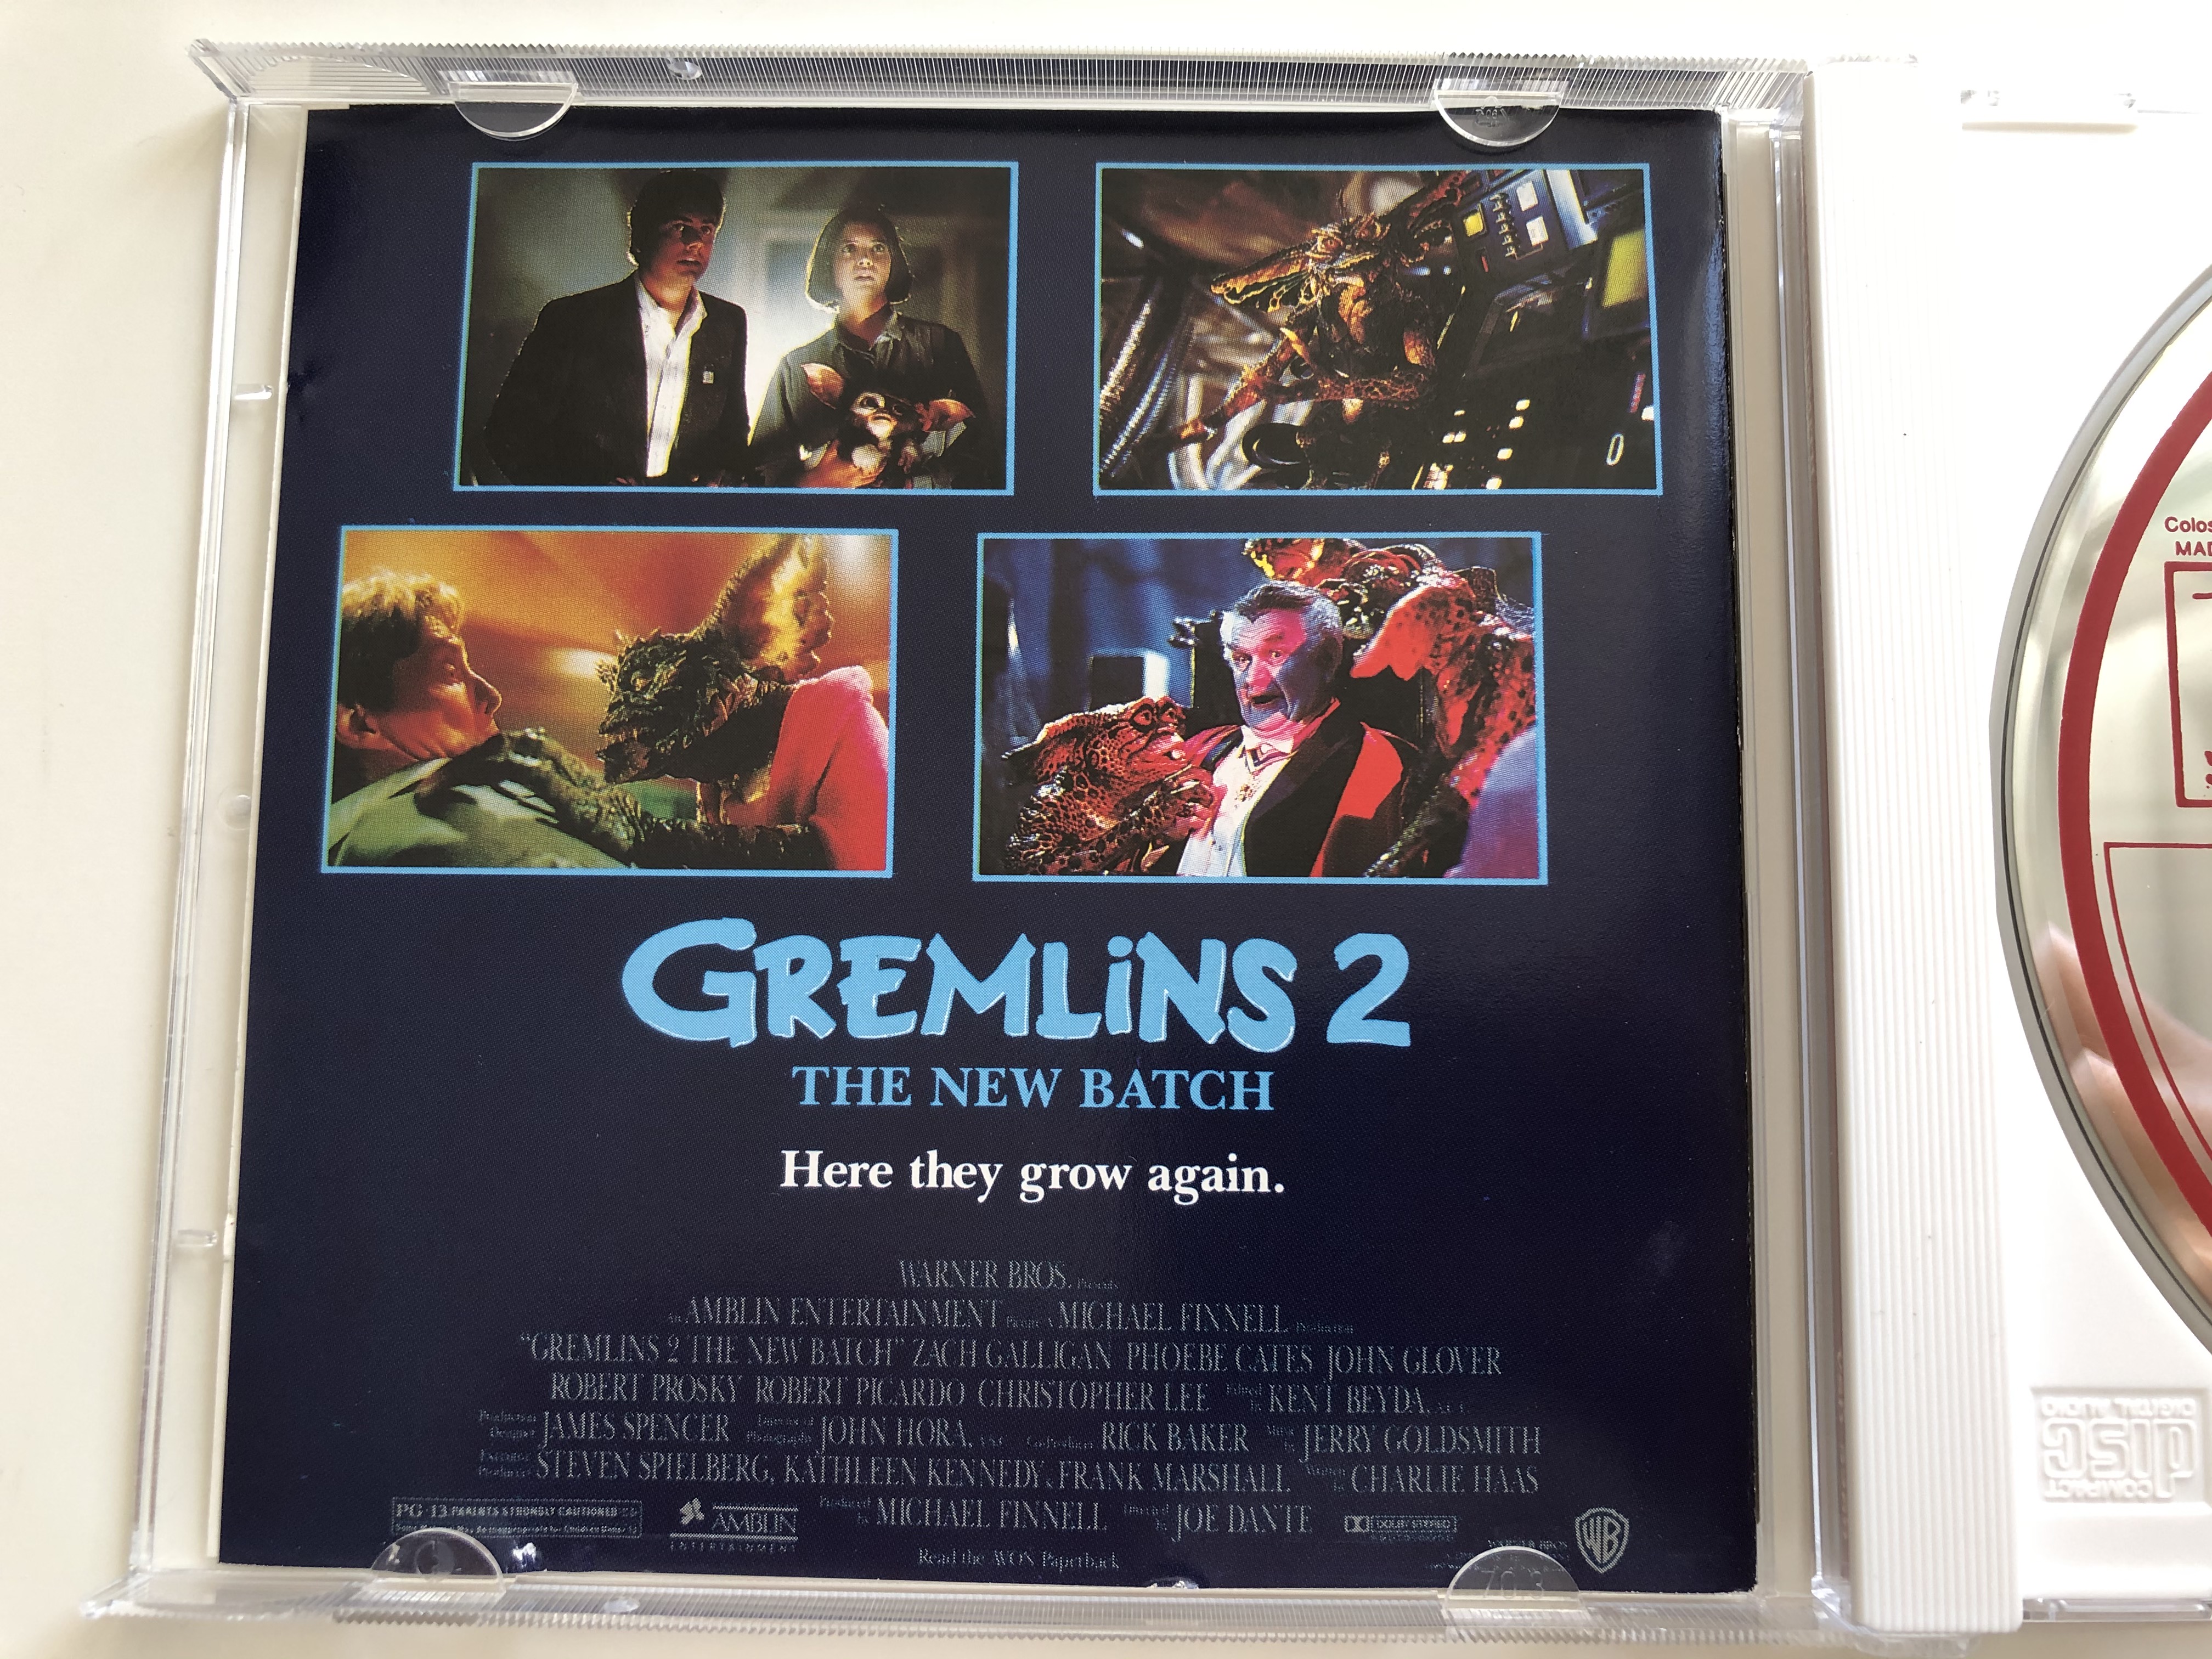 original-motion-picture-soundtrack-gremlins-2-the-new-batch-music-composed-and-conducted-by-jerry-goldsmith-var-se-sarabande-audio-cd-1990-vsd-5269-3-.jpg